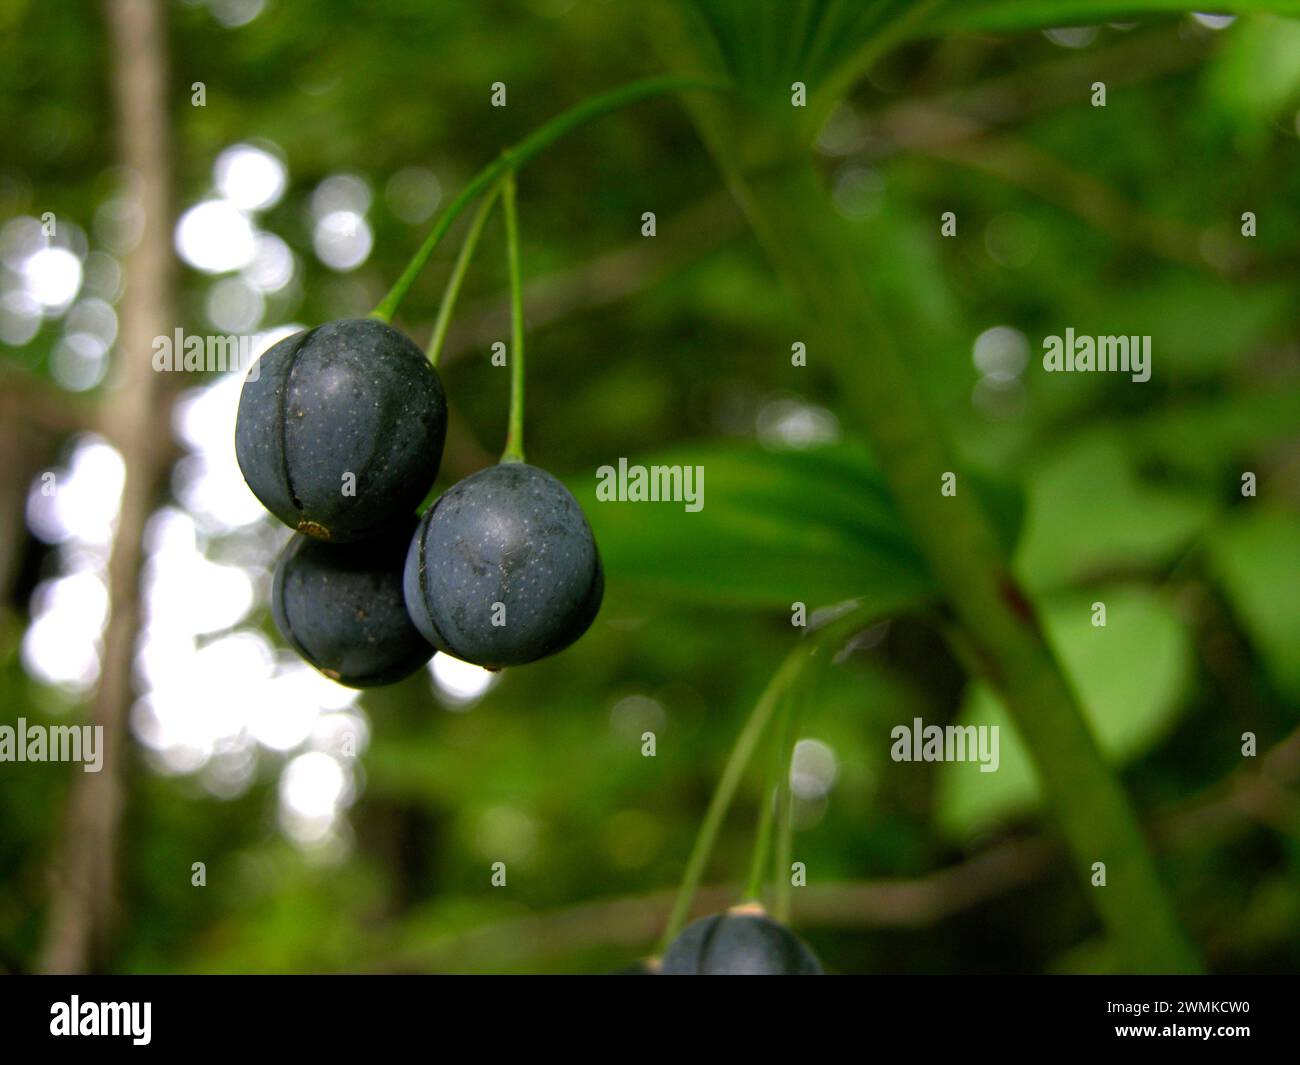 Close-up of Solomon's Seal berries (Polygonatum) hanging from their stems on the plant; North Carolina, United States of America Stock Photo